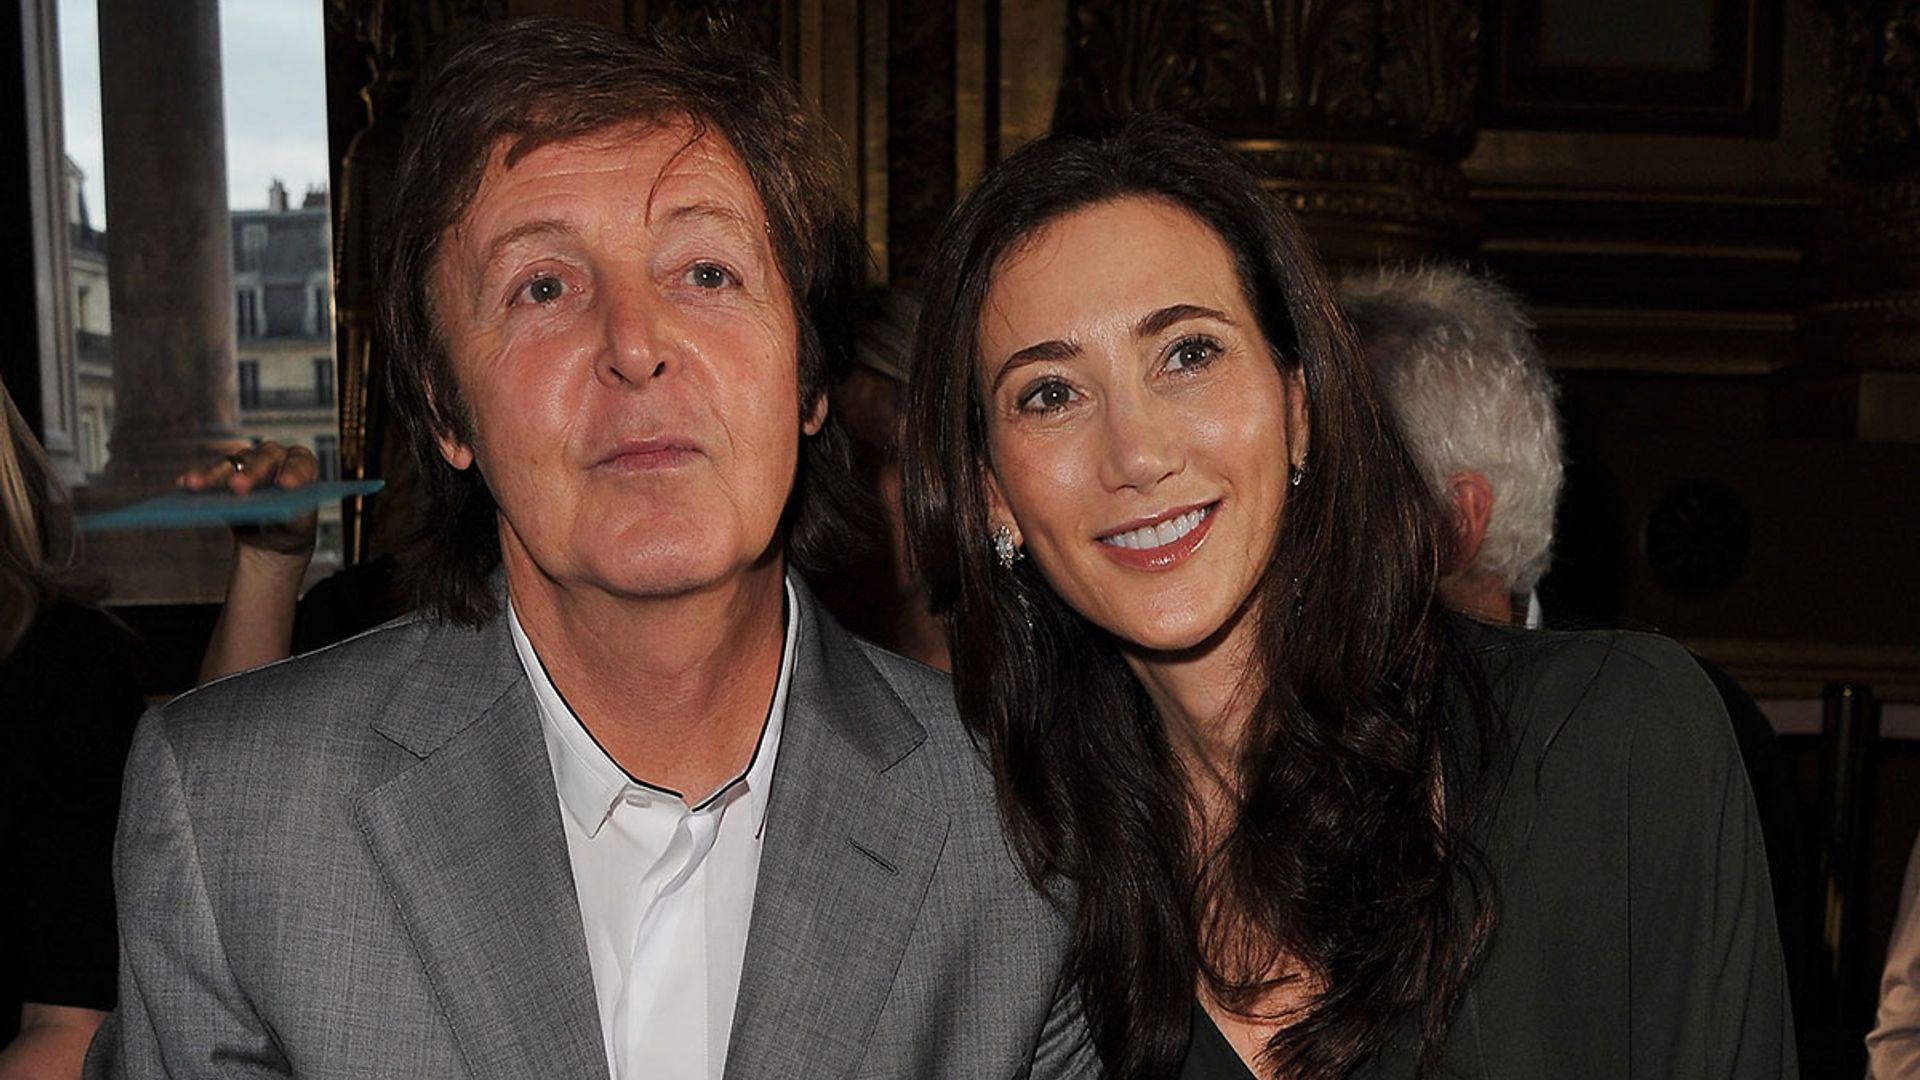 Paul McCartney cosies up to wife Nancy Shevell as they celebrate milestone anniversary